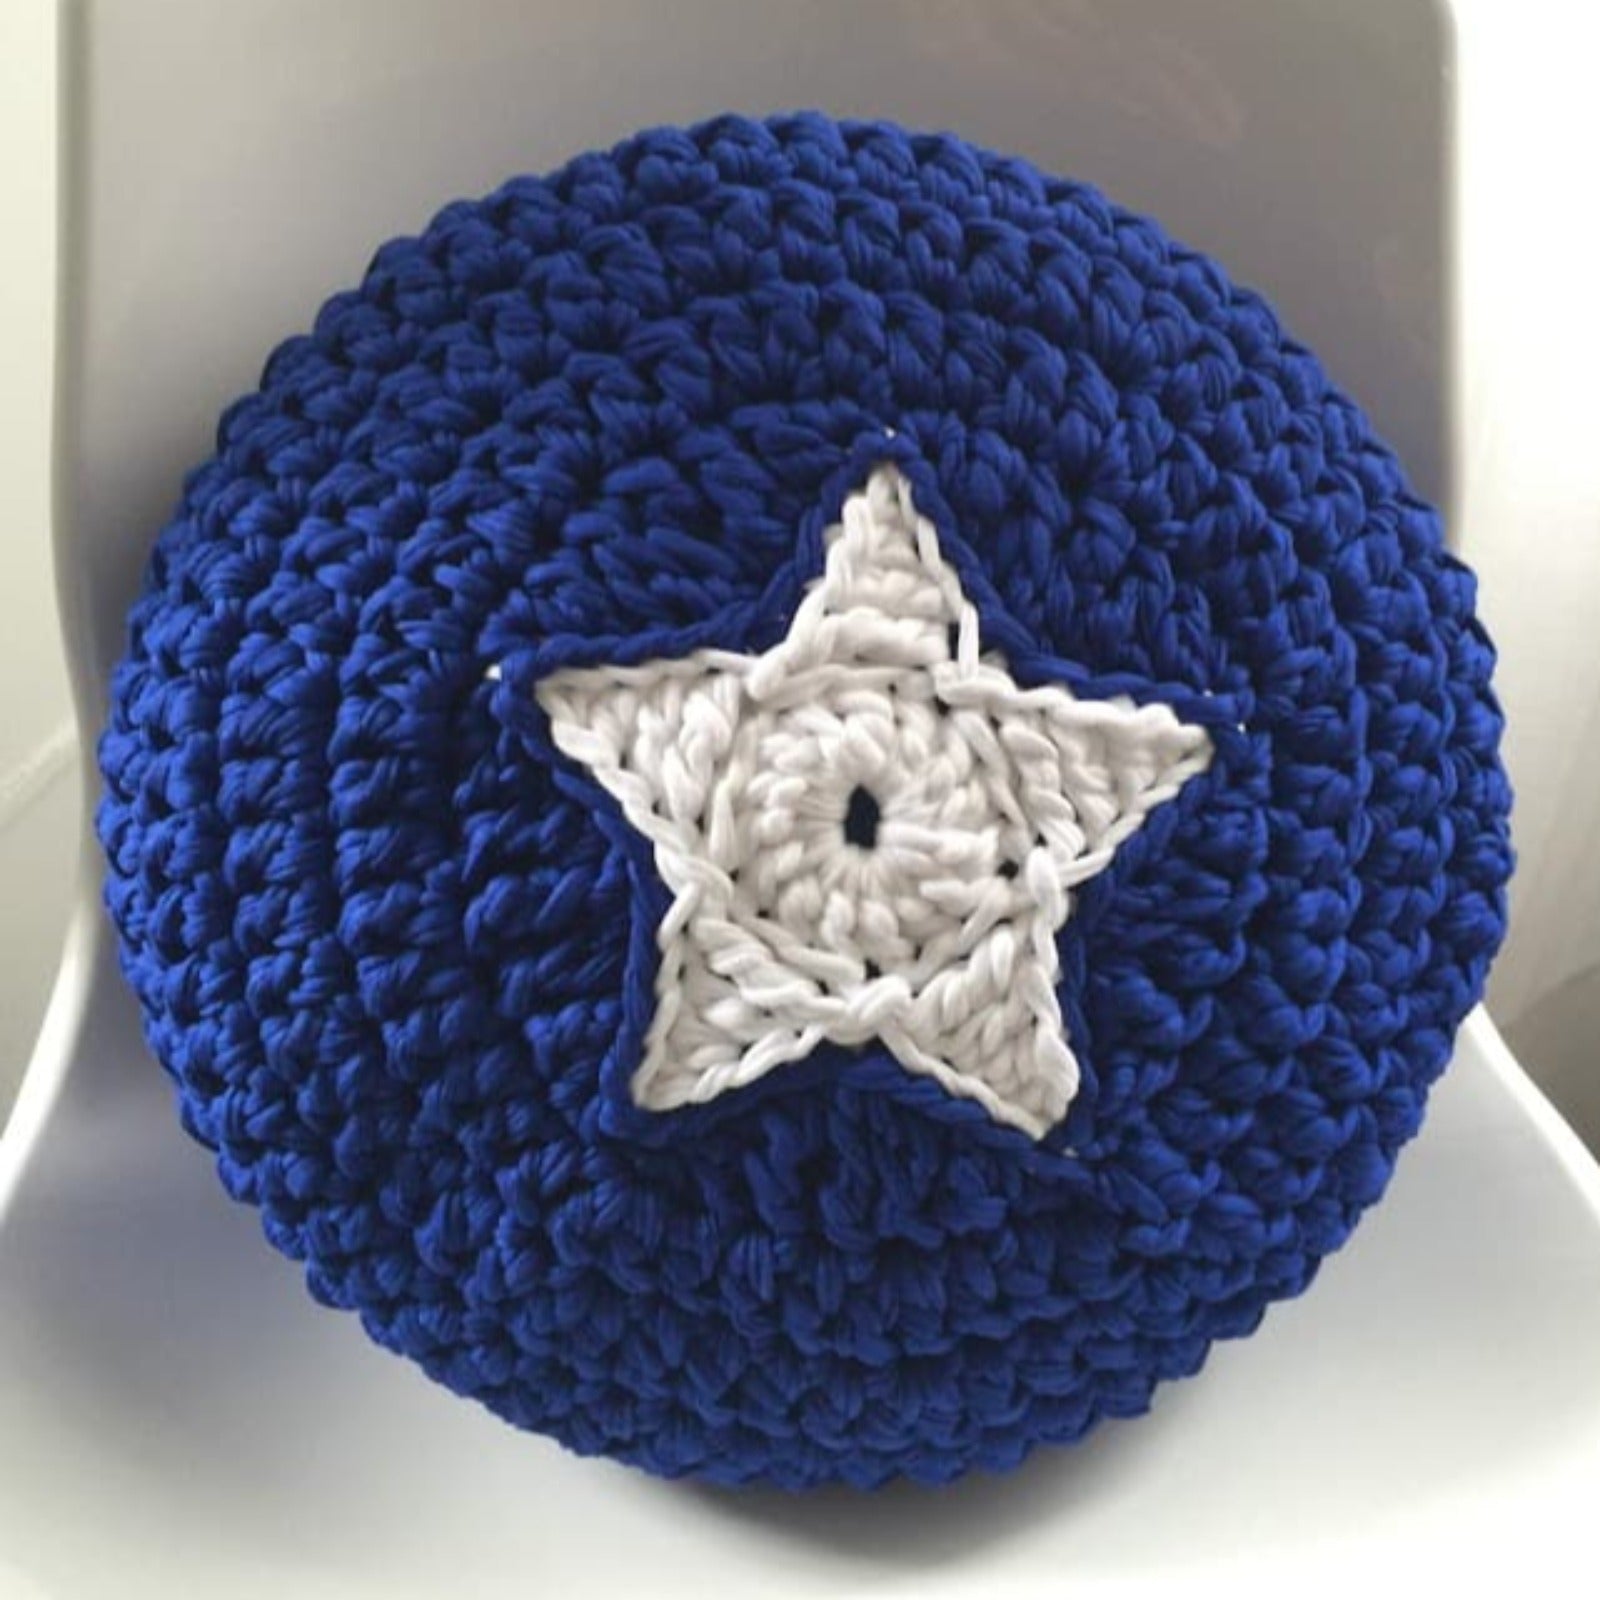 Round Crochet Pillow | Royal Blue with White Star Design - Looping Home